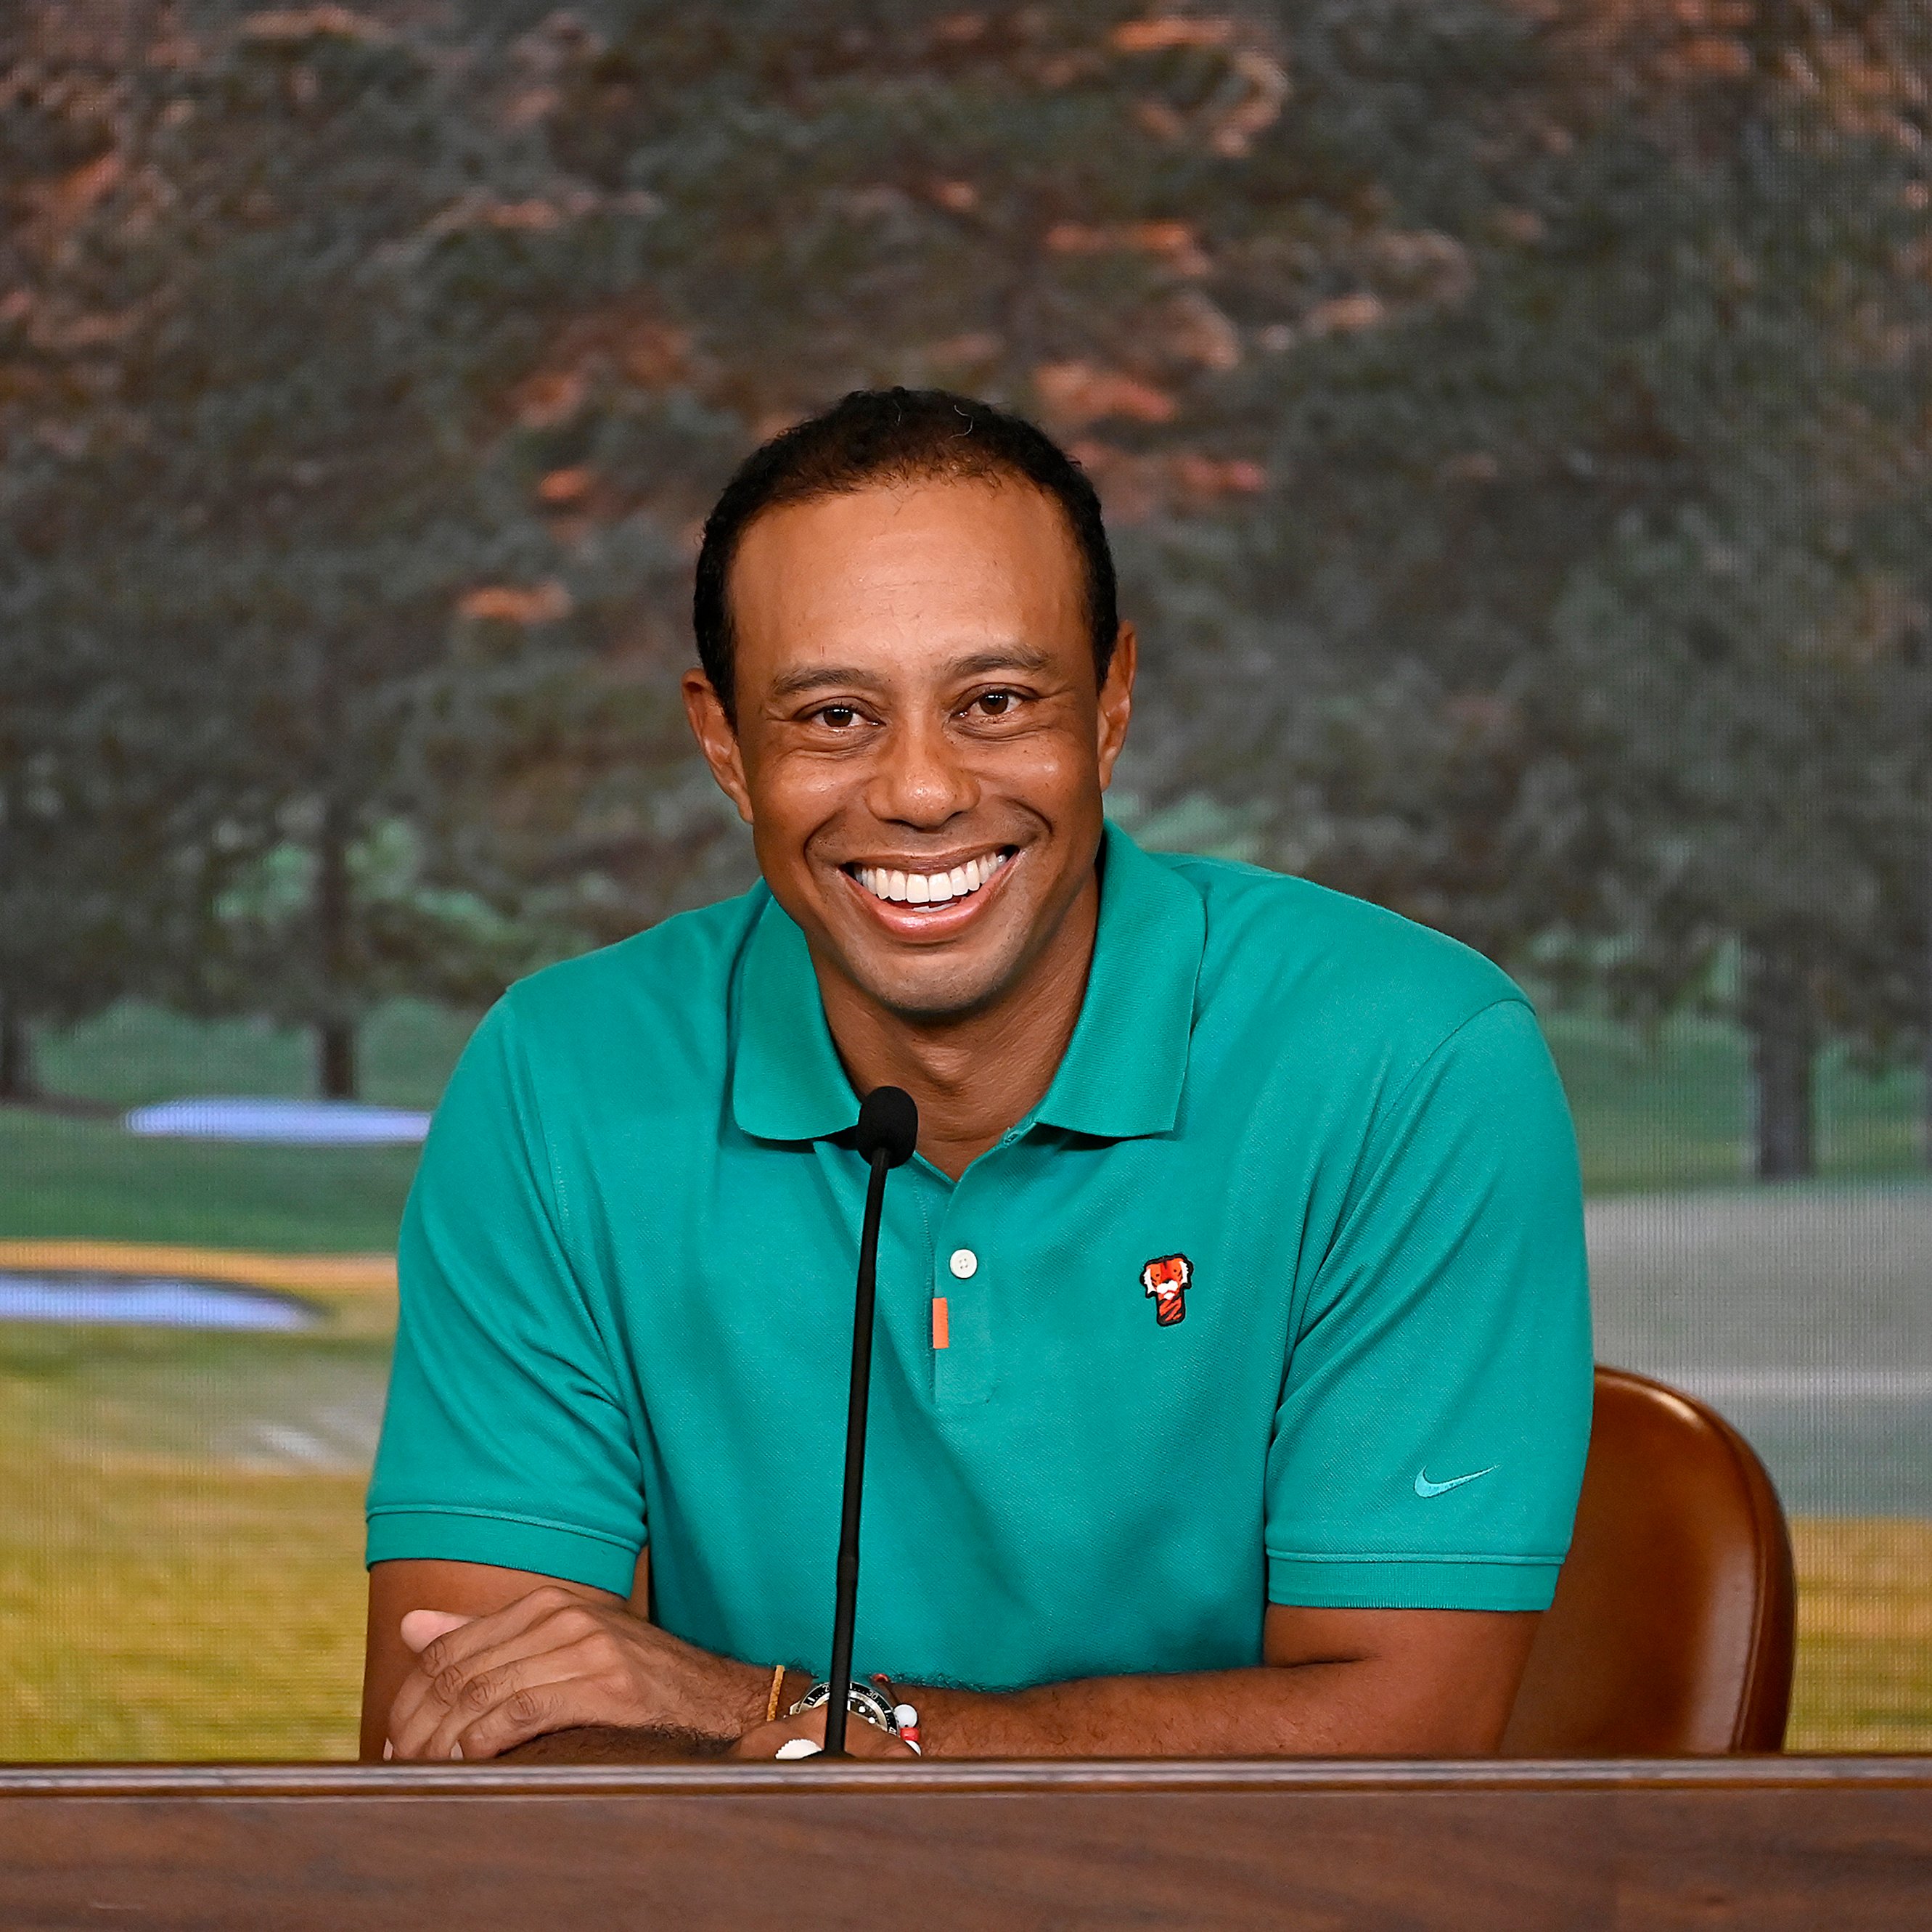 Collection 98+ Images recent photos of tiger woods Stunning